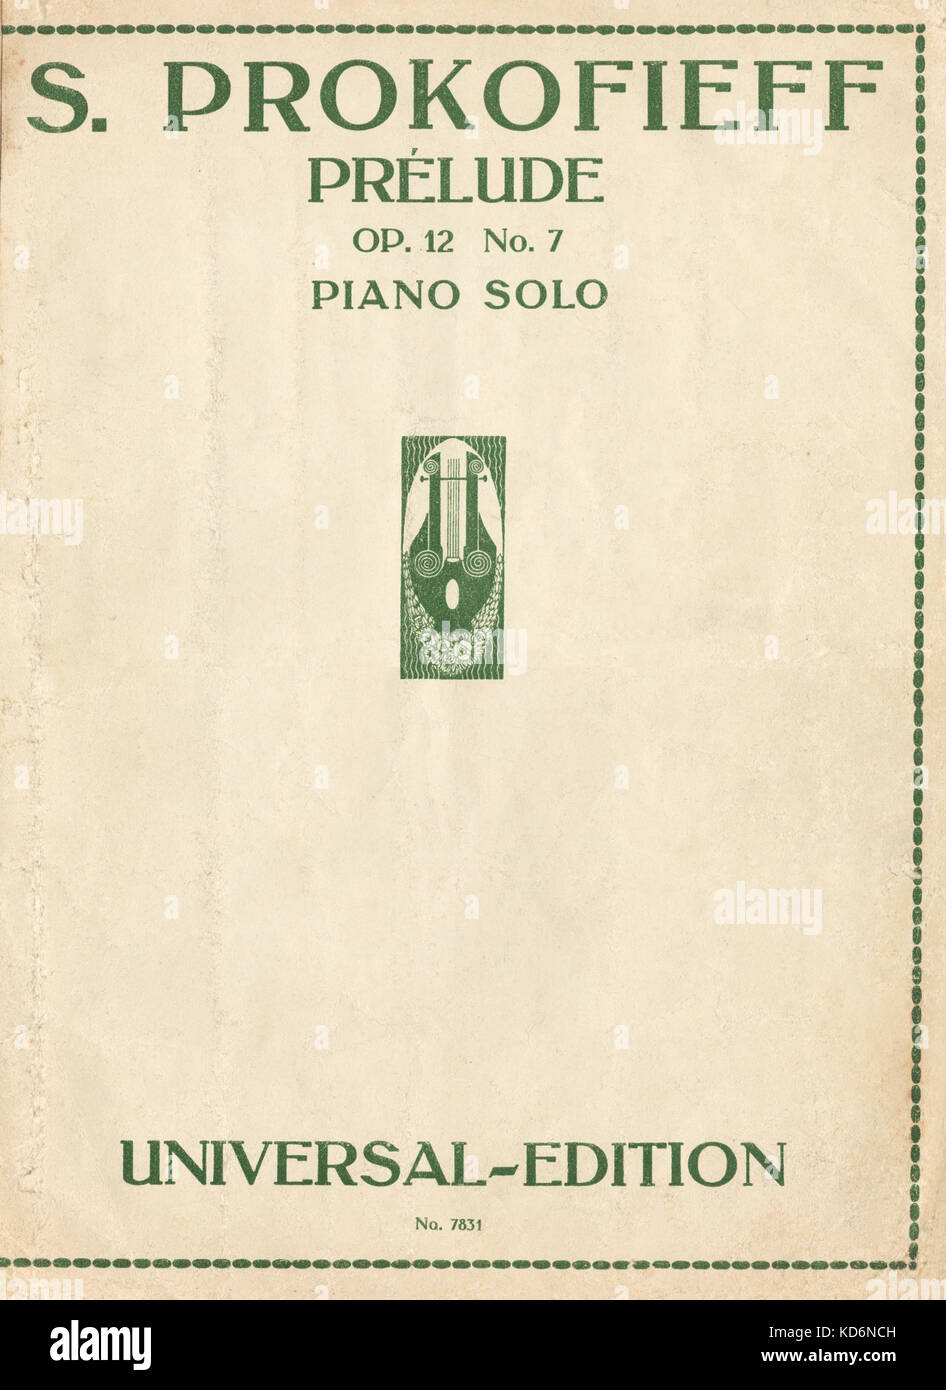 Sergei Prokofiev - Prélude, Opus 12, No 7, Piano solo. Score cover. Published by Universal Edition, Vienna 1932. Russian composer, 27 April 1891 - 5 March 1953. Stock Photo